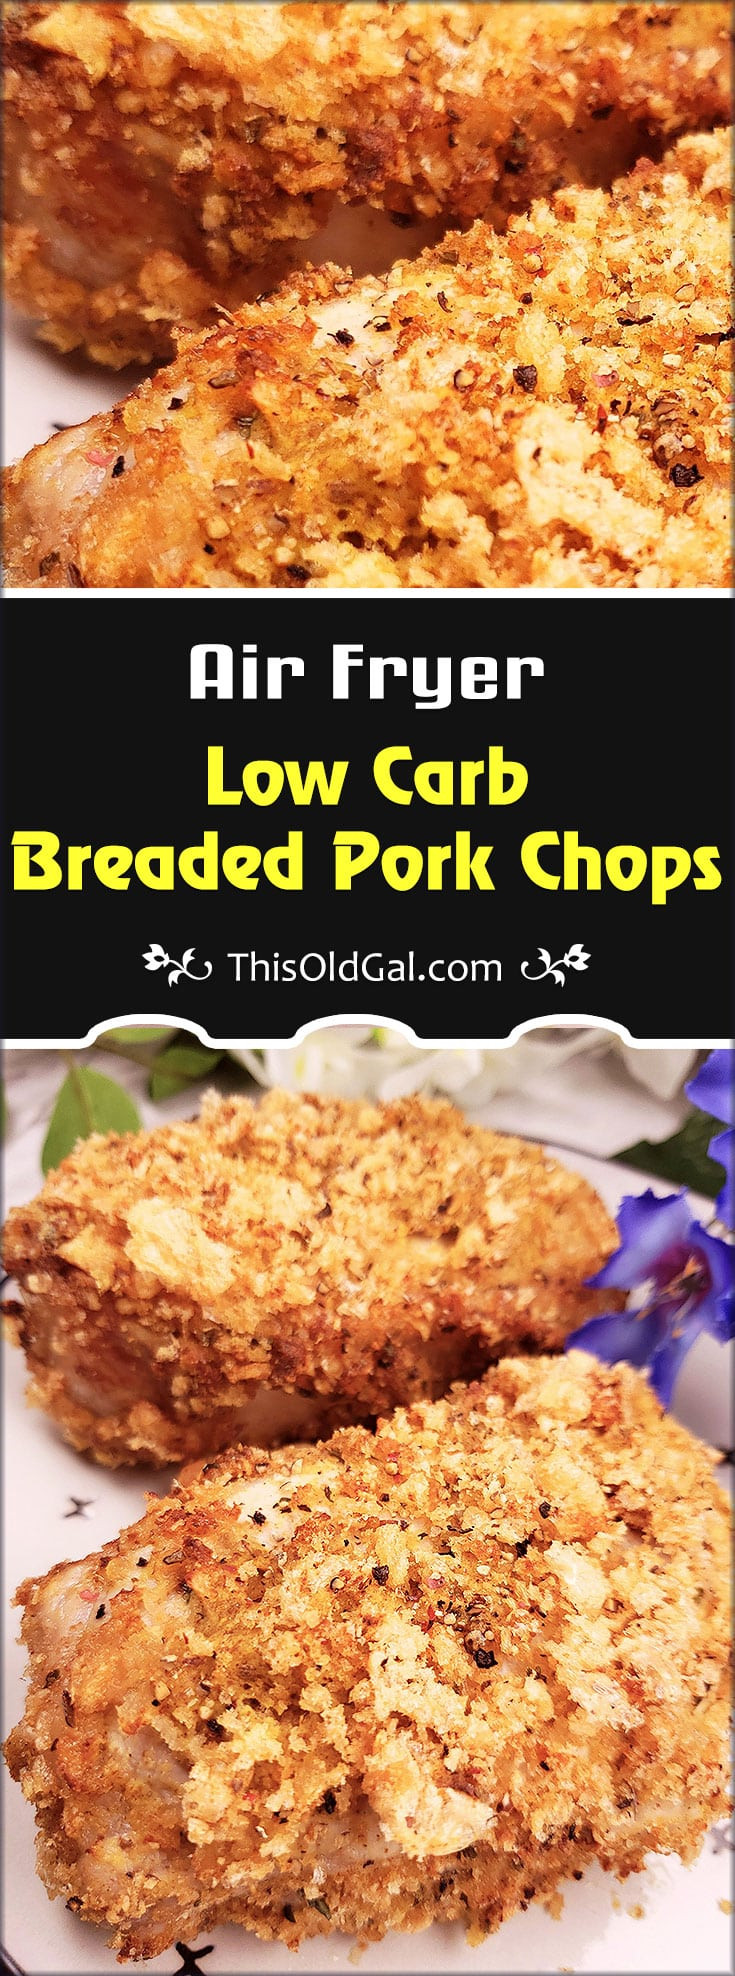 Low Carb Breaded Pork Chops
 Low Carb Breaded Pork Chops in the Air Fryer